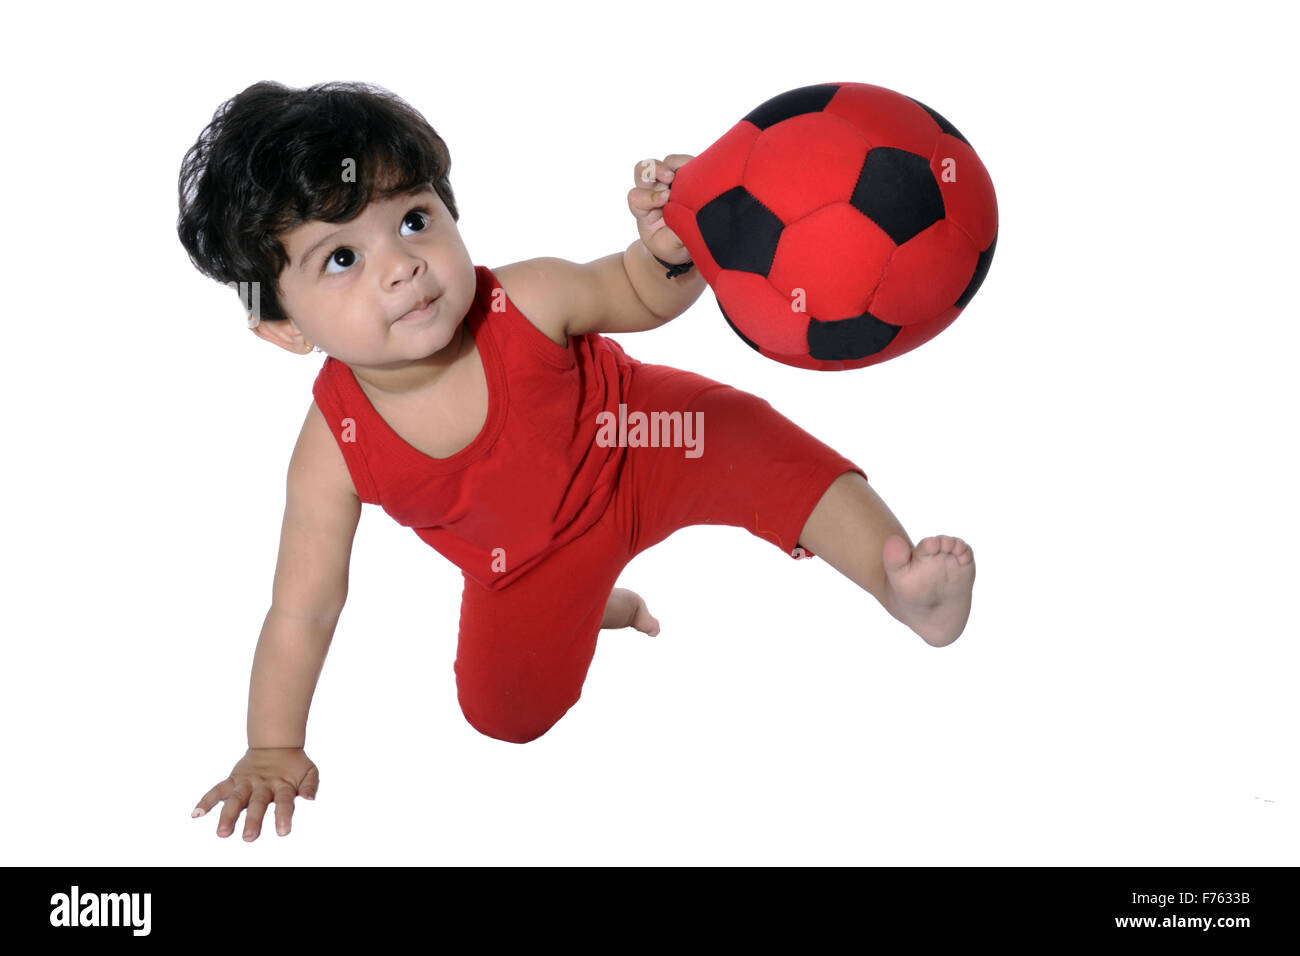 Baby boy playing with ball Stock Photo